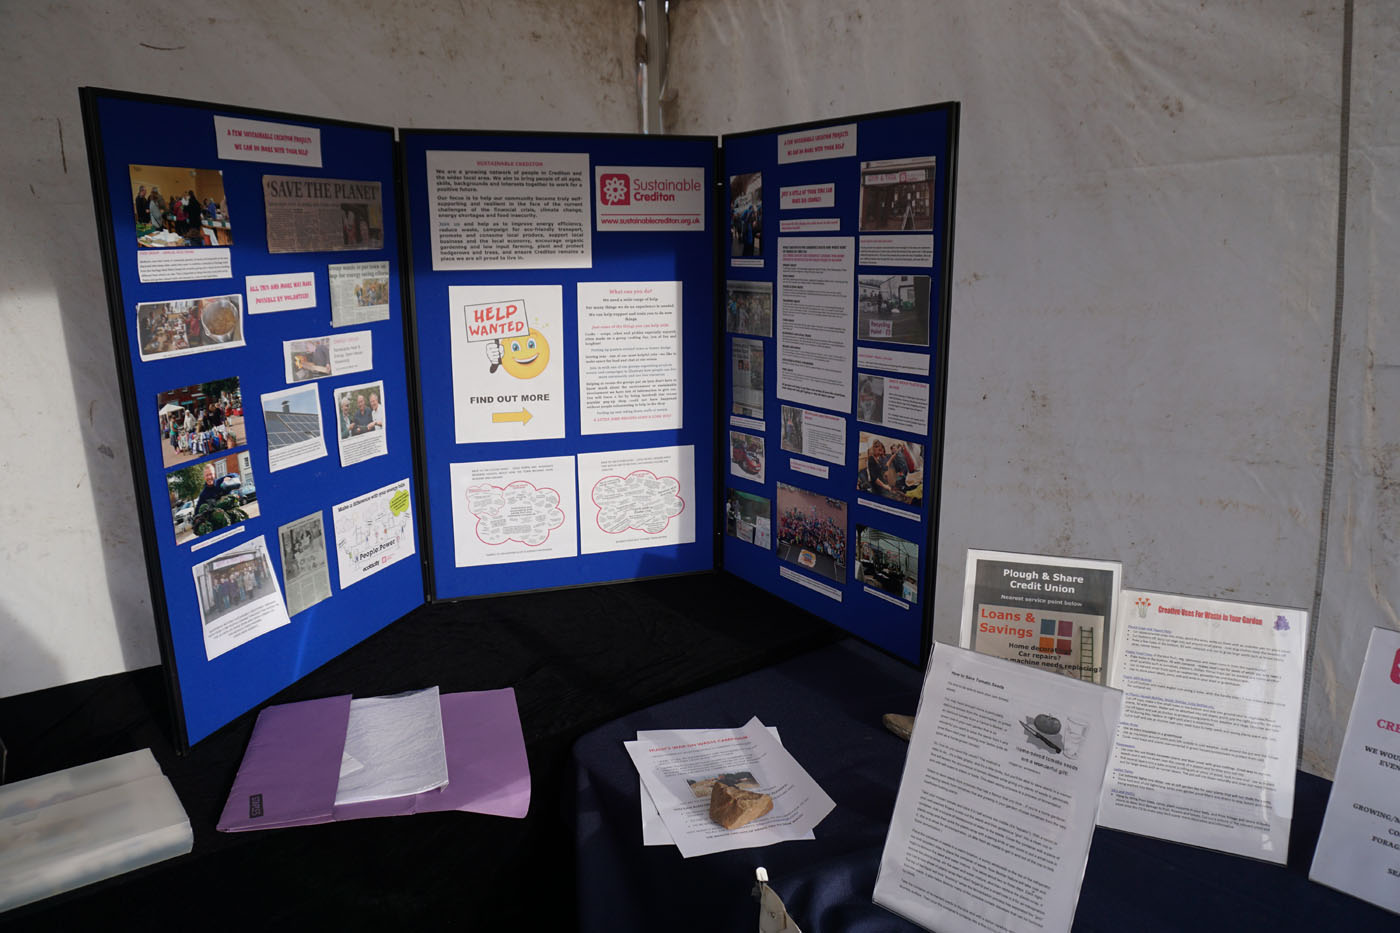 Photograph of the Sustainable Crediton stall